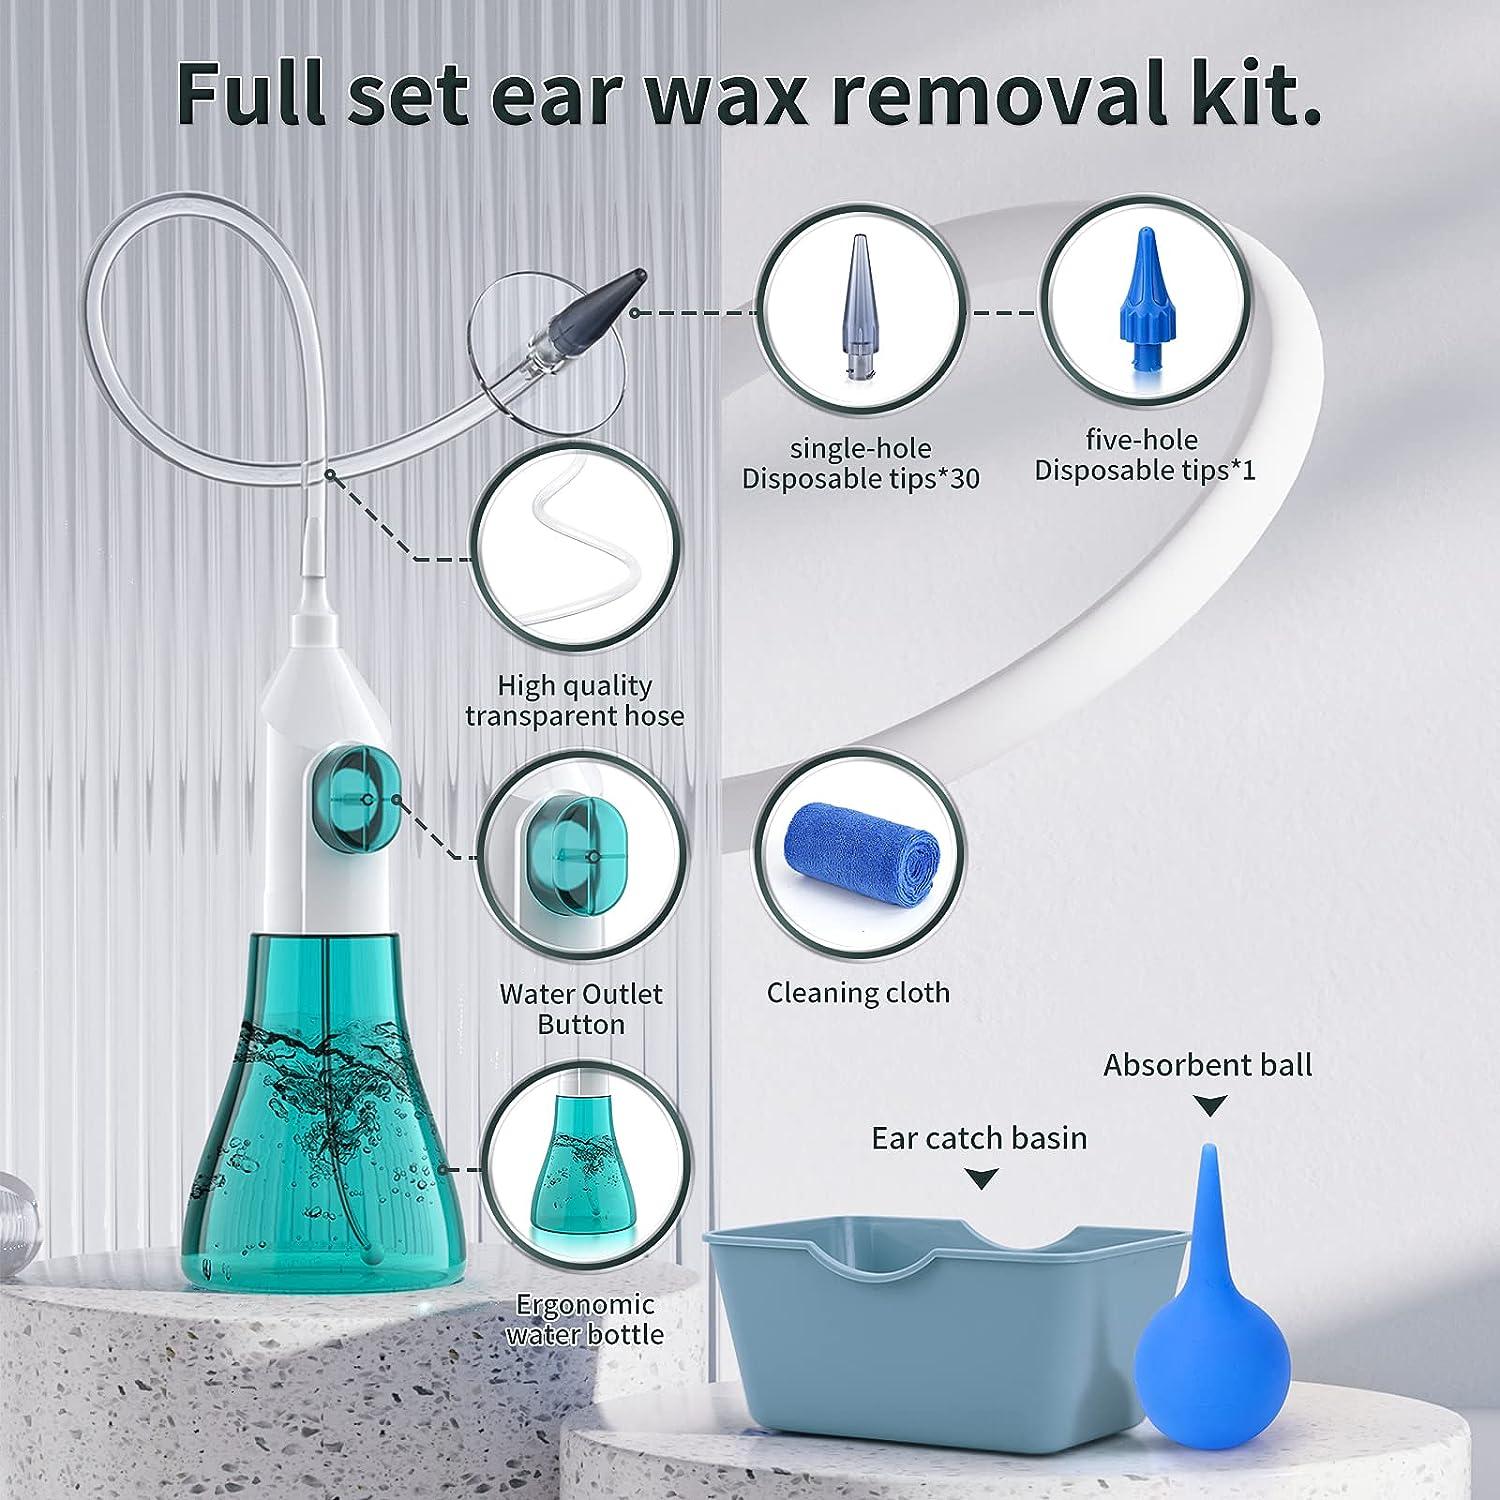 Ear Wax Removal, Manual Ear Irrigation Flushing System, Ear Wax Removal  Tool, Ear Cleaning Kit for Adults & Kids, Ear Wax Removal Kit Includes  Basin, Ear Cleaner, Towel, 31 Disposable Tips